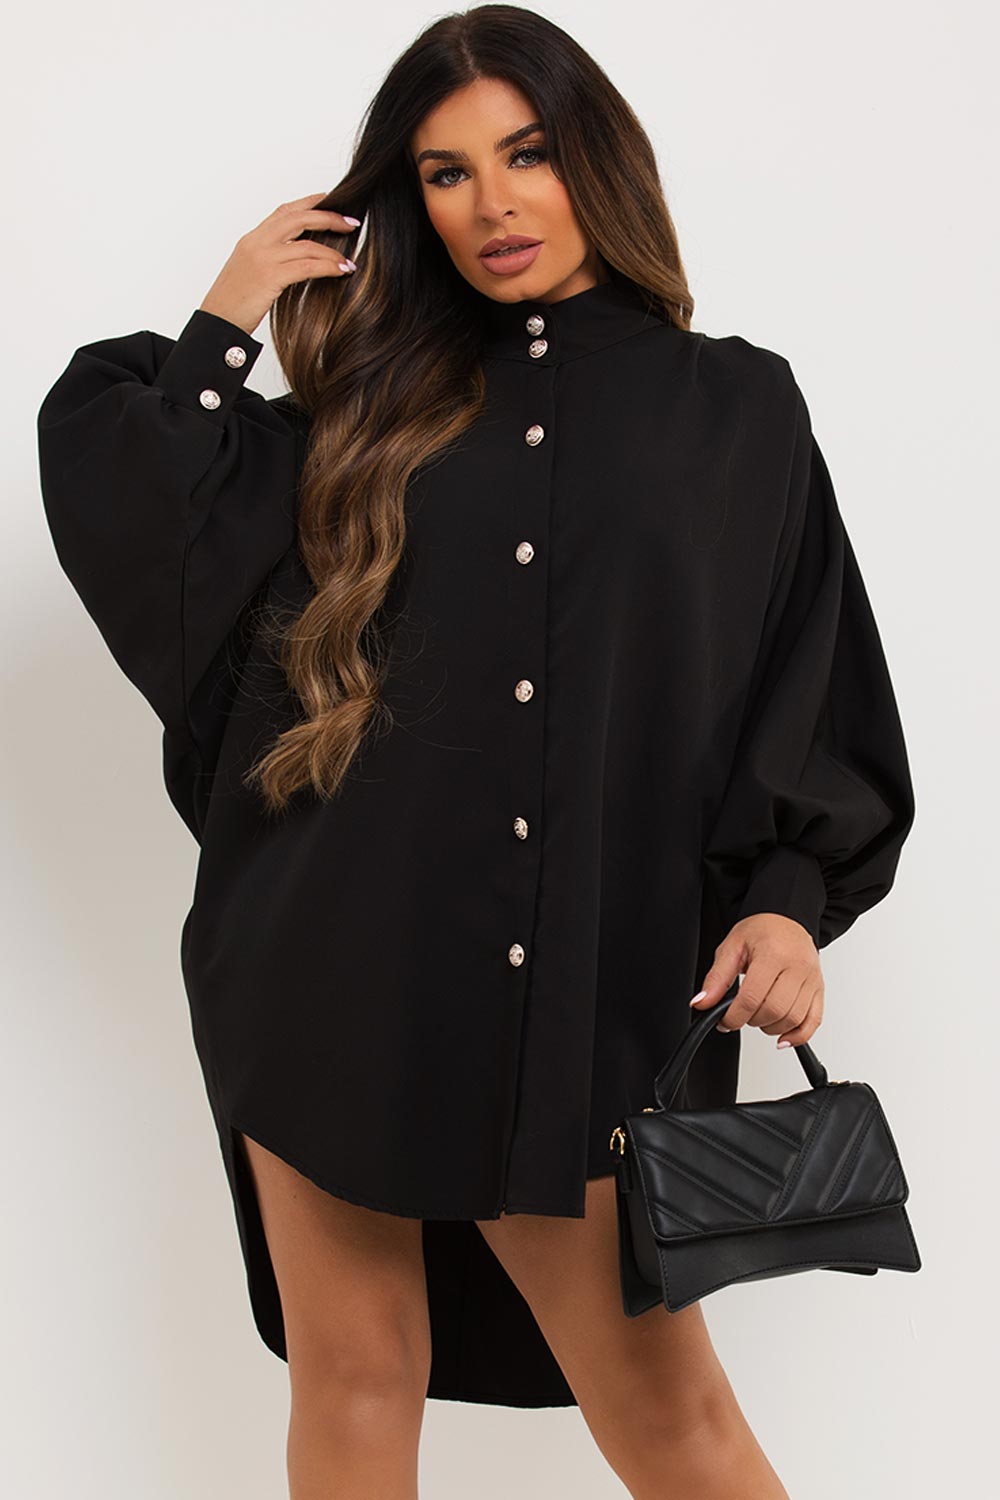 oversized shirt dress races outfit